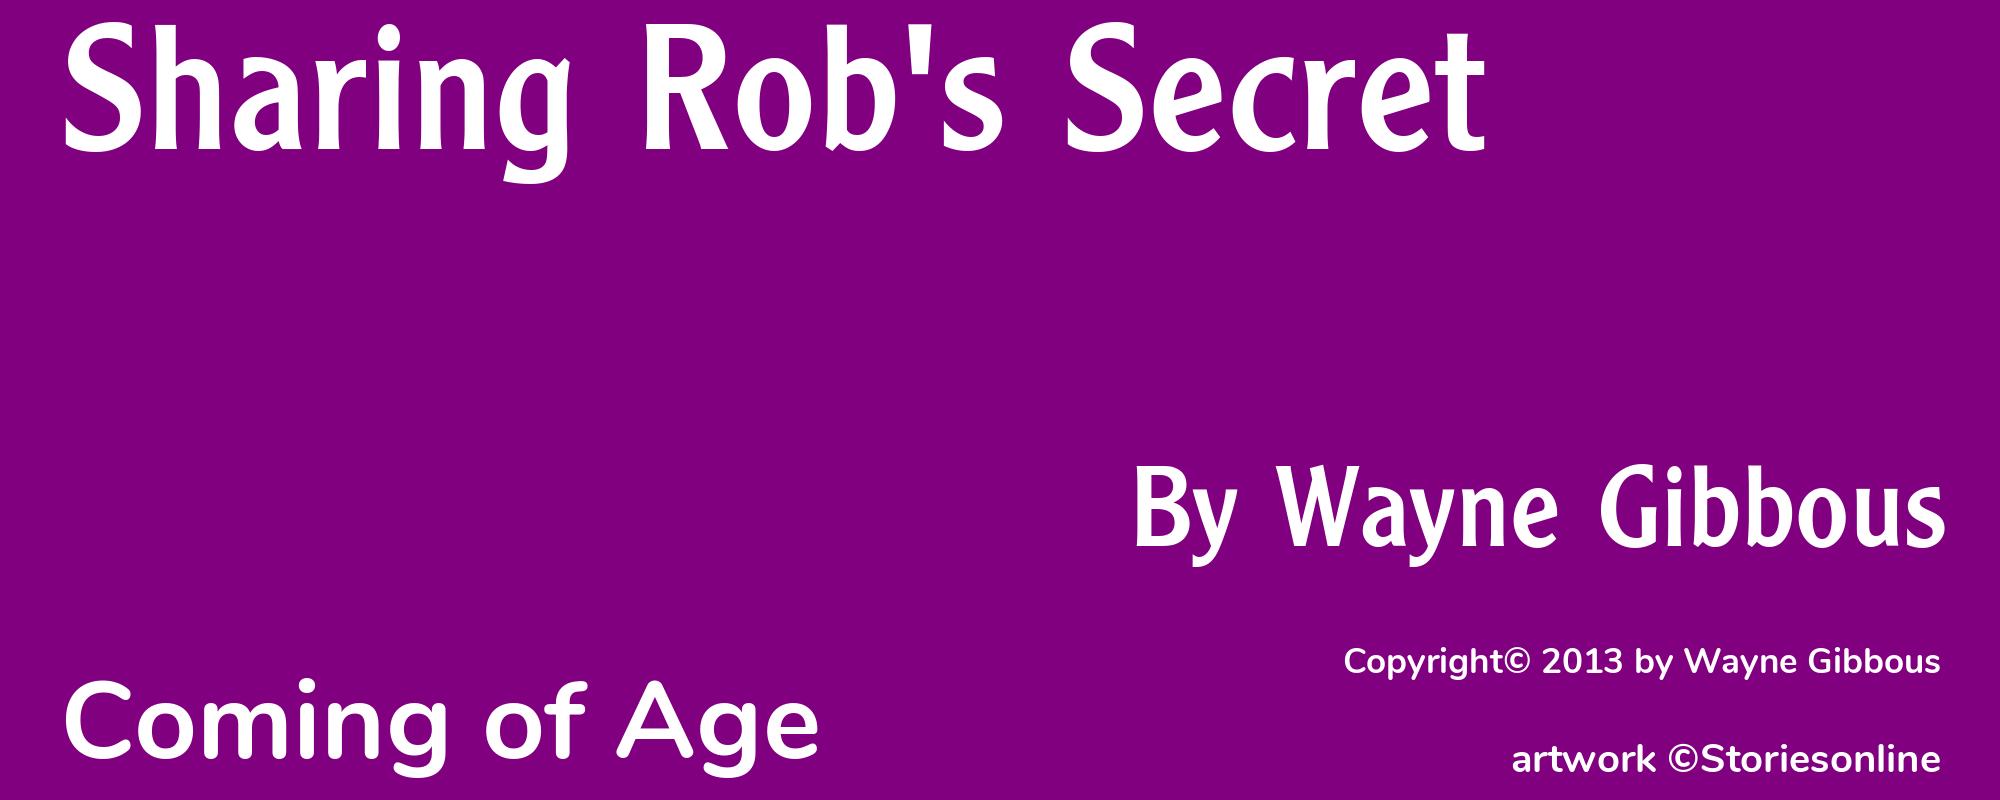 Sharing Rob's Secret - Cover